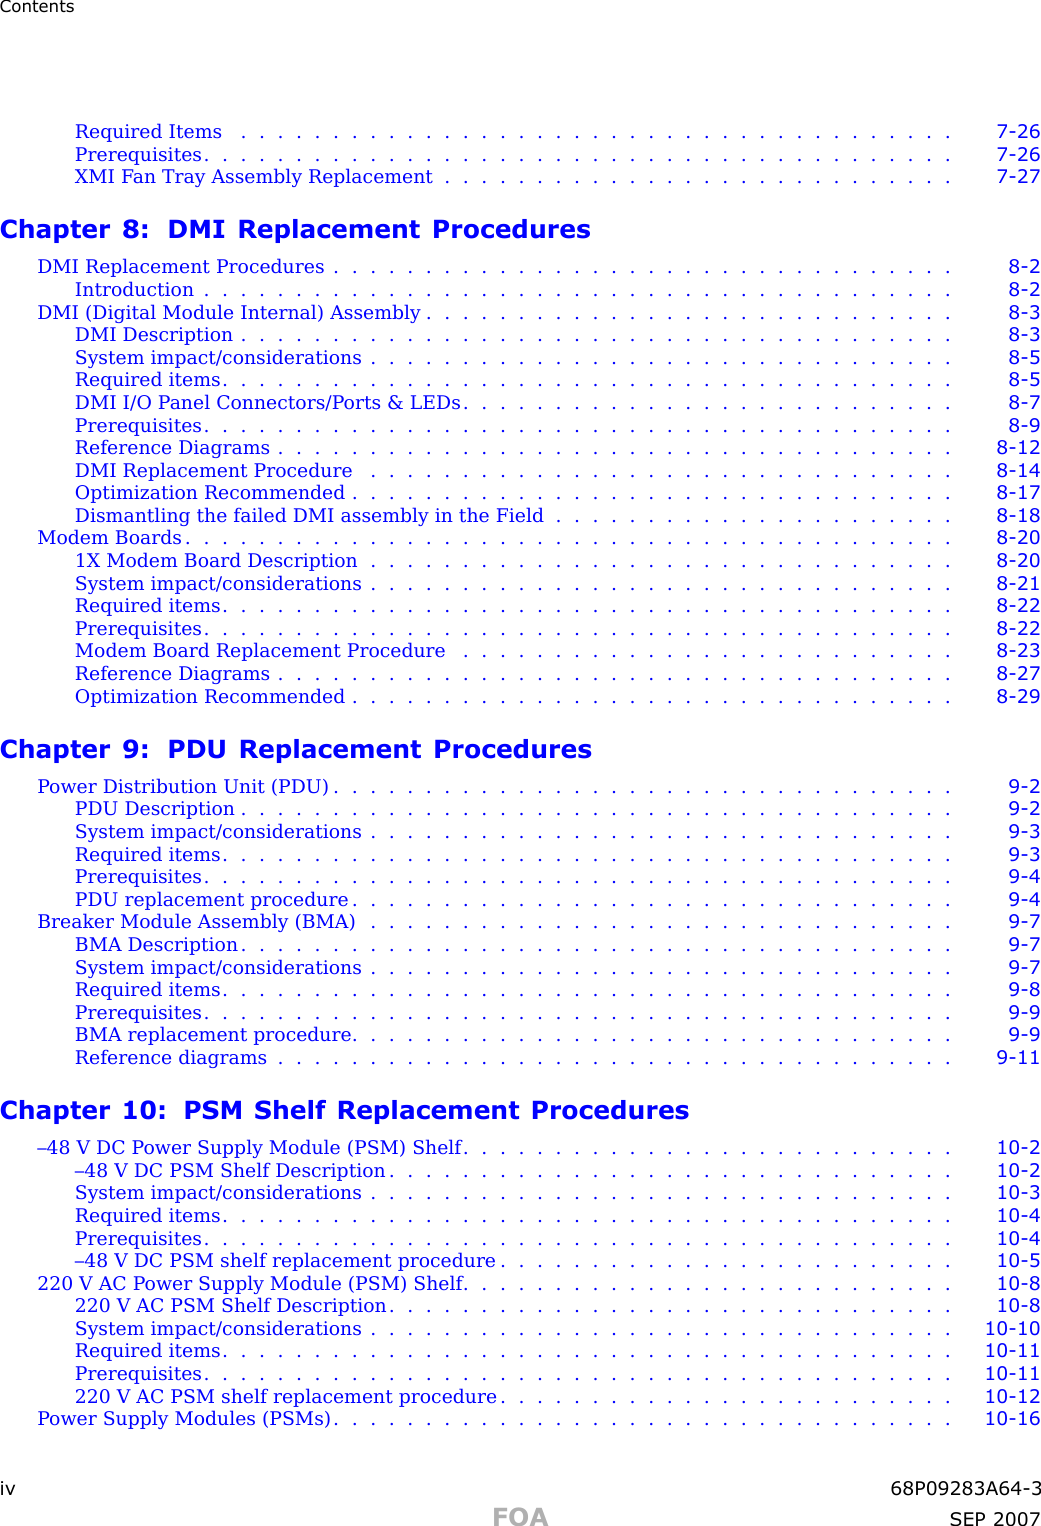 ContentsRequired Items ....................................... 7 - 26Prerequisites ......................................... 7 - 26XMI F an Tray Assembly Replacement . . . . . . . . . . . . . . . . . . . . . . . . . . . . 7 - 27Chapter 8: DMI Replacement ProceduresDMI Replacement Procedures . . . . . . . . . . . . . . . . . . . . . . . . . . . . . . . . . . 8 - 2Introduction ......................................... 8 - 2DMI (Digital Module Internal) Assembly . . . . . . . . . . . . . . . . . . . . . . . . . . . . . 8 - 3DMI Description ....................................... 8 - 3System impact/considerations . . . . . . . . . . . . . . . . . . . . . . . . . . . . . . . . 8 - 5Required items ........................................ 8 - 5DMI I/O P anel Connectors/P orts &amp; LEDs . . . . . . . . . . . . . . . . . . . . . . . . . . . 8 - 7Prerequisites ......................................... 8 - 9Reference Diagrams ..................................... 8 - 12DMI Replacement Procedure . . . . . . . . . . . . . . . . . . . . . . . . . . . . . . . . 8 - 14Optimization Recommended . . . . . . . . . . . . . . . . . . . . . . . . . . . . . . . . . 8 - 17Dismantling the failed DMI assembly in the Field . . . . . . . . . . . . . . . . . . . . . . 8 - 18Modem Boards .......................................... 8 - 201X Modem Board Description . . . . . . . . . . . . . . . . . . . . . . . . . . . . . . . . 8 - 20System impact/considerations . . . . . . . . . . . . . . . . . . . . . . . . . . . . . . . . 8 - 21Required items ........................................ 8 - 22Prerequisites ......................................... 8 - 22Modem Board Replacement Procedure . . . . . . . . . . . . . . . . . . . . . . . . . . . 8 - 23Reference Diagrams ..................................... 8 - 27Optimization Recommended . . . . . . . . . . . . . . . . . . . . . . . . . . . . . . . . . 8 - 29Chapter 9: PDU Replacement ProceduresP ower Distribution Unit (PDU) . . . . . . . . . . . . . . . . . . . . . . . . . . . . . . . . . . 9 - 2PDU Description ....................................... 9 - 2System impact/considerations . . . . . . . . . . . . . . . . . . . . . . . . . . . . . . . . 9 - 3Required items ........................................ 9 - 3Prerequisites ......................................... 9 - 4PDU replacement procedure . . . . . . . . . . . . . . . . . . . . . . . . . . . . . . . . . 9 - 4Breaker Module Assembly (BMA) . . . . . . . . . . . . . . . . . . . . . . . . . . . . . . . . 9 - 7BMA Description ....................................... 9 - 7System impact/considerations . . . . . . . . . . . . . . . . . . . . . . . . . . . . . . . . 9 - 7Required items ........................................ 9 - 8Prerequisites ......................................... 9 - 9BMA replacement procedure . . . . . . . . . . . . . . . . . . . . . . . . . . . . . . . . . 9 - 9Reference diagrams ..................................... 9 - 11Chapter 10: PSM Shelf Replacement Procedures–48 V DC P ower Supply Module (PSM) Shelf . . . . . . . . . . . . . . . . . . . . . . . . . . . 10 - 2–48 V DC PSM Shelf Description . . . . . . . . . . . . . . . . . . . . . . . . . . . . . . . 10 - 2System impact/considerations . . . . . . . . . . . . . . . . . . . . . . . . . . . . . . . . 10 - 3Required items ........................................ 10 - 4Prerequisites ......................................... 10 - 4–48 V DC PSM shelf replacement procedure . . . . . . . . . . . . . . . . . . . . . . . . . 10 - 5220 V AC P ower Supply Module (PSM) Shelf . . . . . . . . . . . . . . . . . . . . . . . . . . . 10 - 8220 V AC PSM Shelf Description . . . . . . . . . . . . . . . . . . . . . . . . . . . . . . . 10 - 8System impact/considerations . . . . . . . . . . . . . . . . . . . . . . . . . . . . . . . . 10 - 10Required items ........................................ 10 - 11Prerequisites ......................................... 10 - 11220 V AC PSM shelf replacement procedure . . . . . . . . . . . . . . . . . . . . . . . . . 10 - 12P ower Supply Modules (PSMs) . . . . . . . . . . . . . . . . . . . . . . . . . . . . . . . . . . 10 - 16iv 68P09283A64 -3FOA SEP 2007